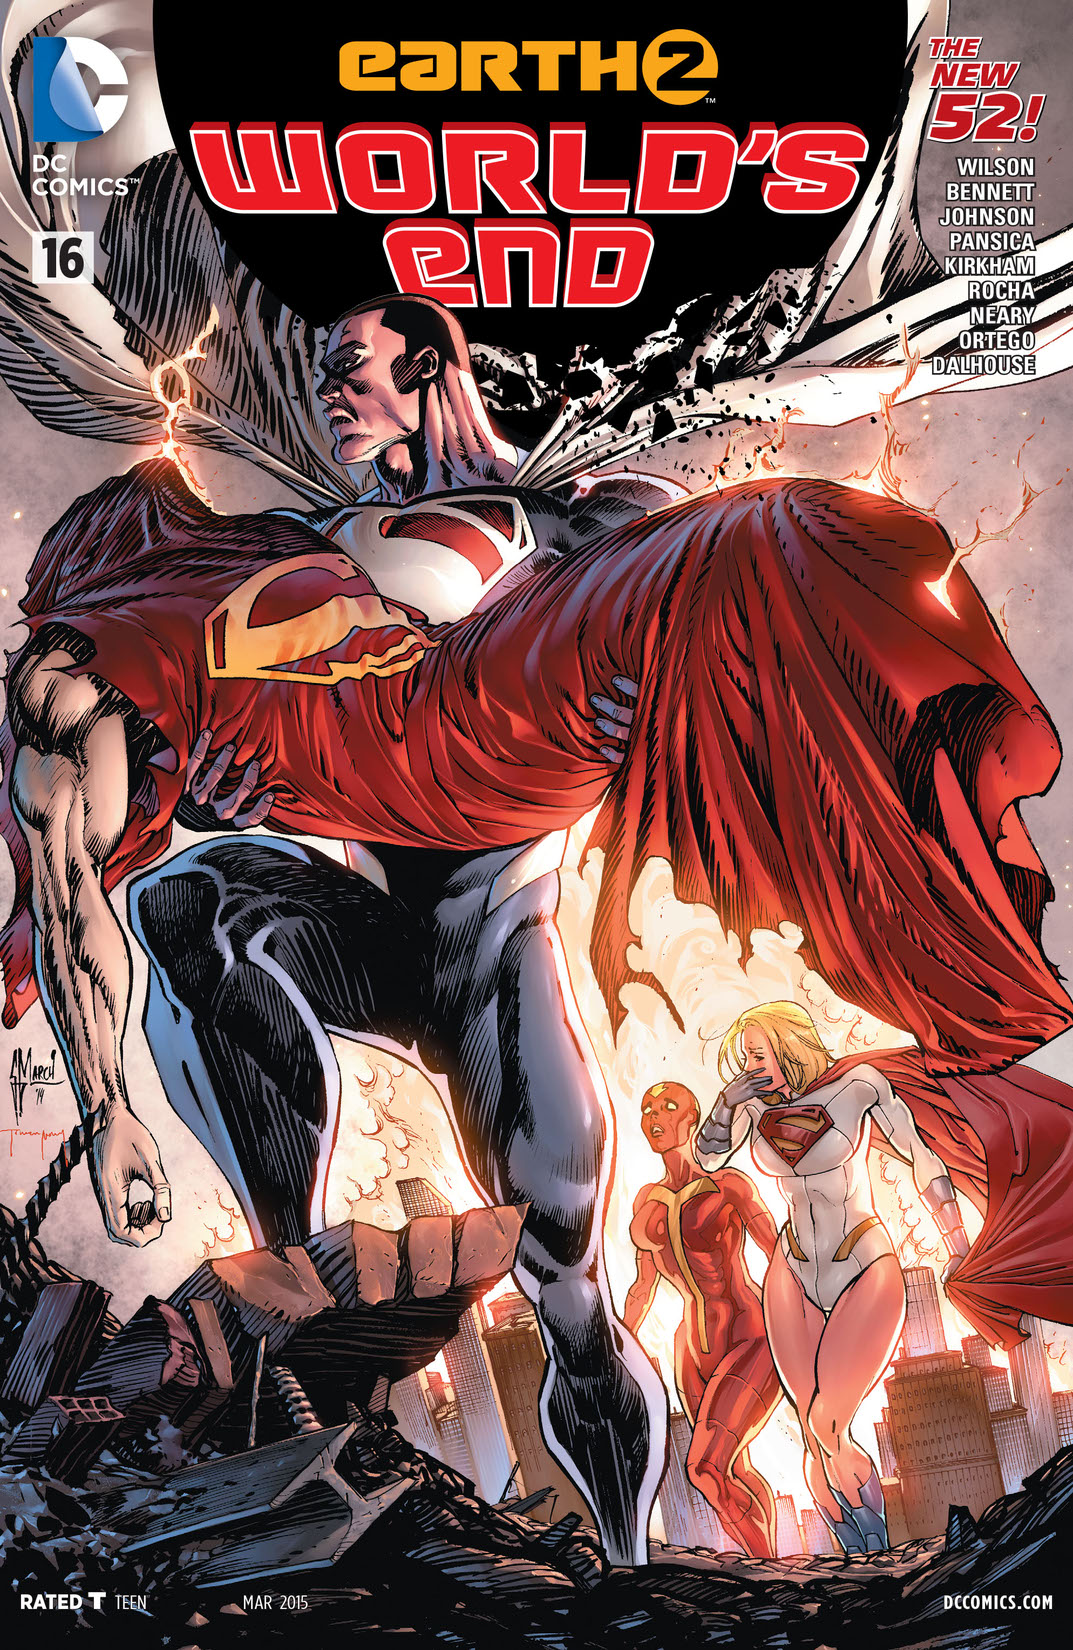 Earth 2: World's End #16 preview images